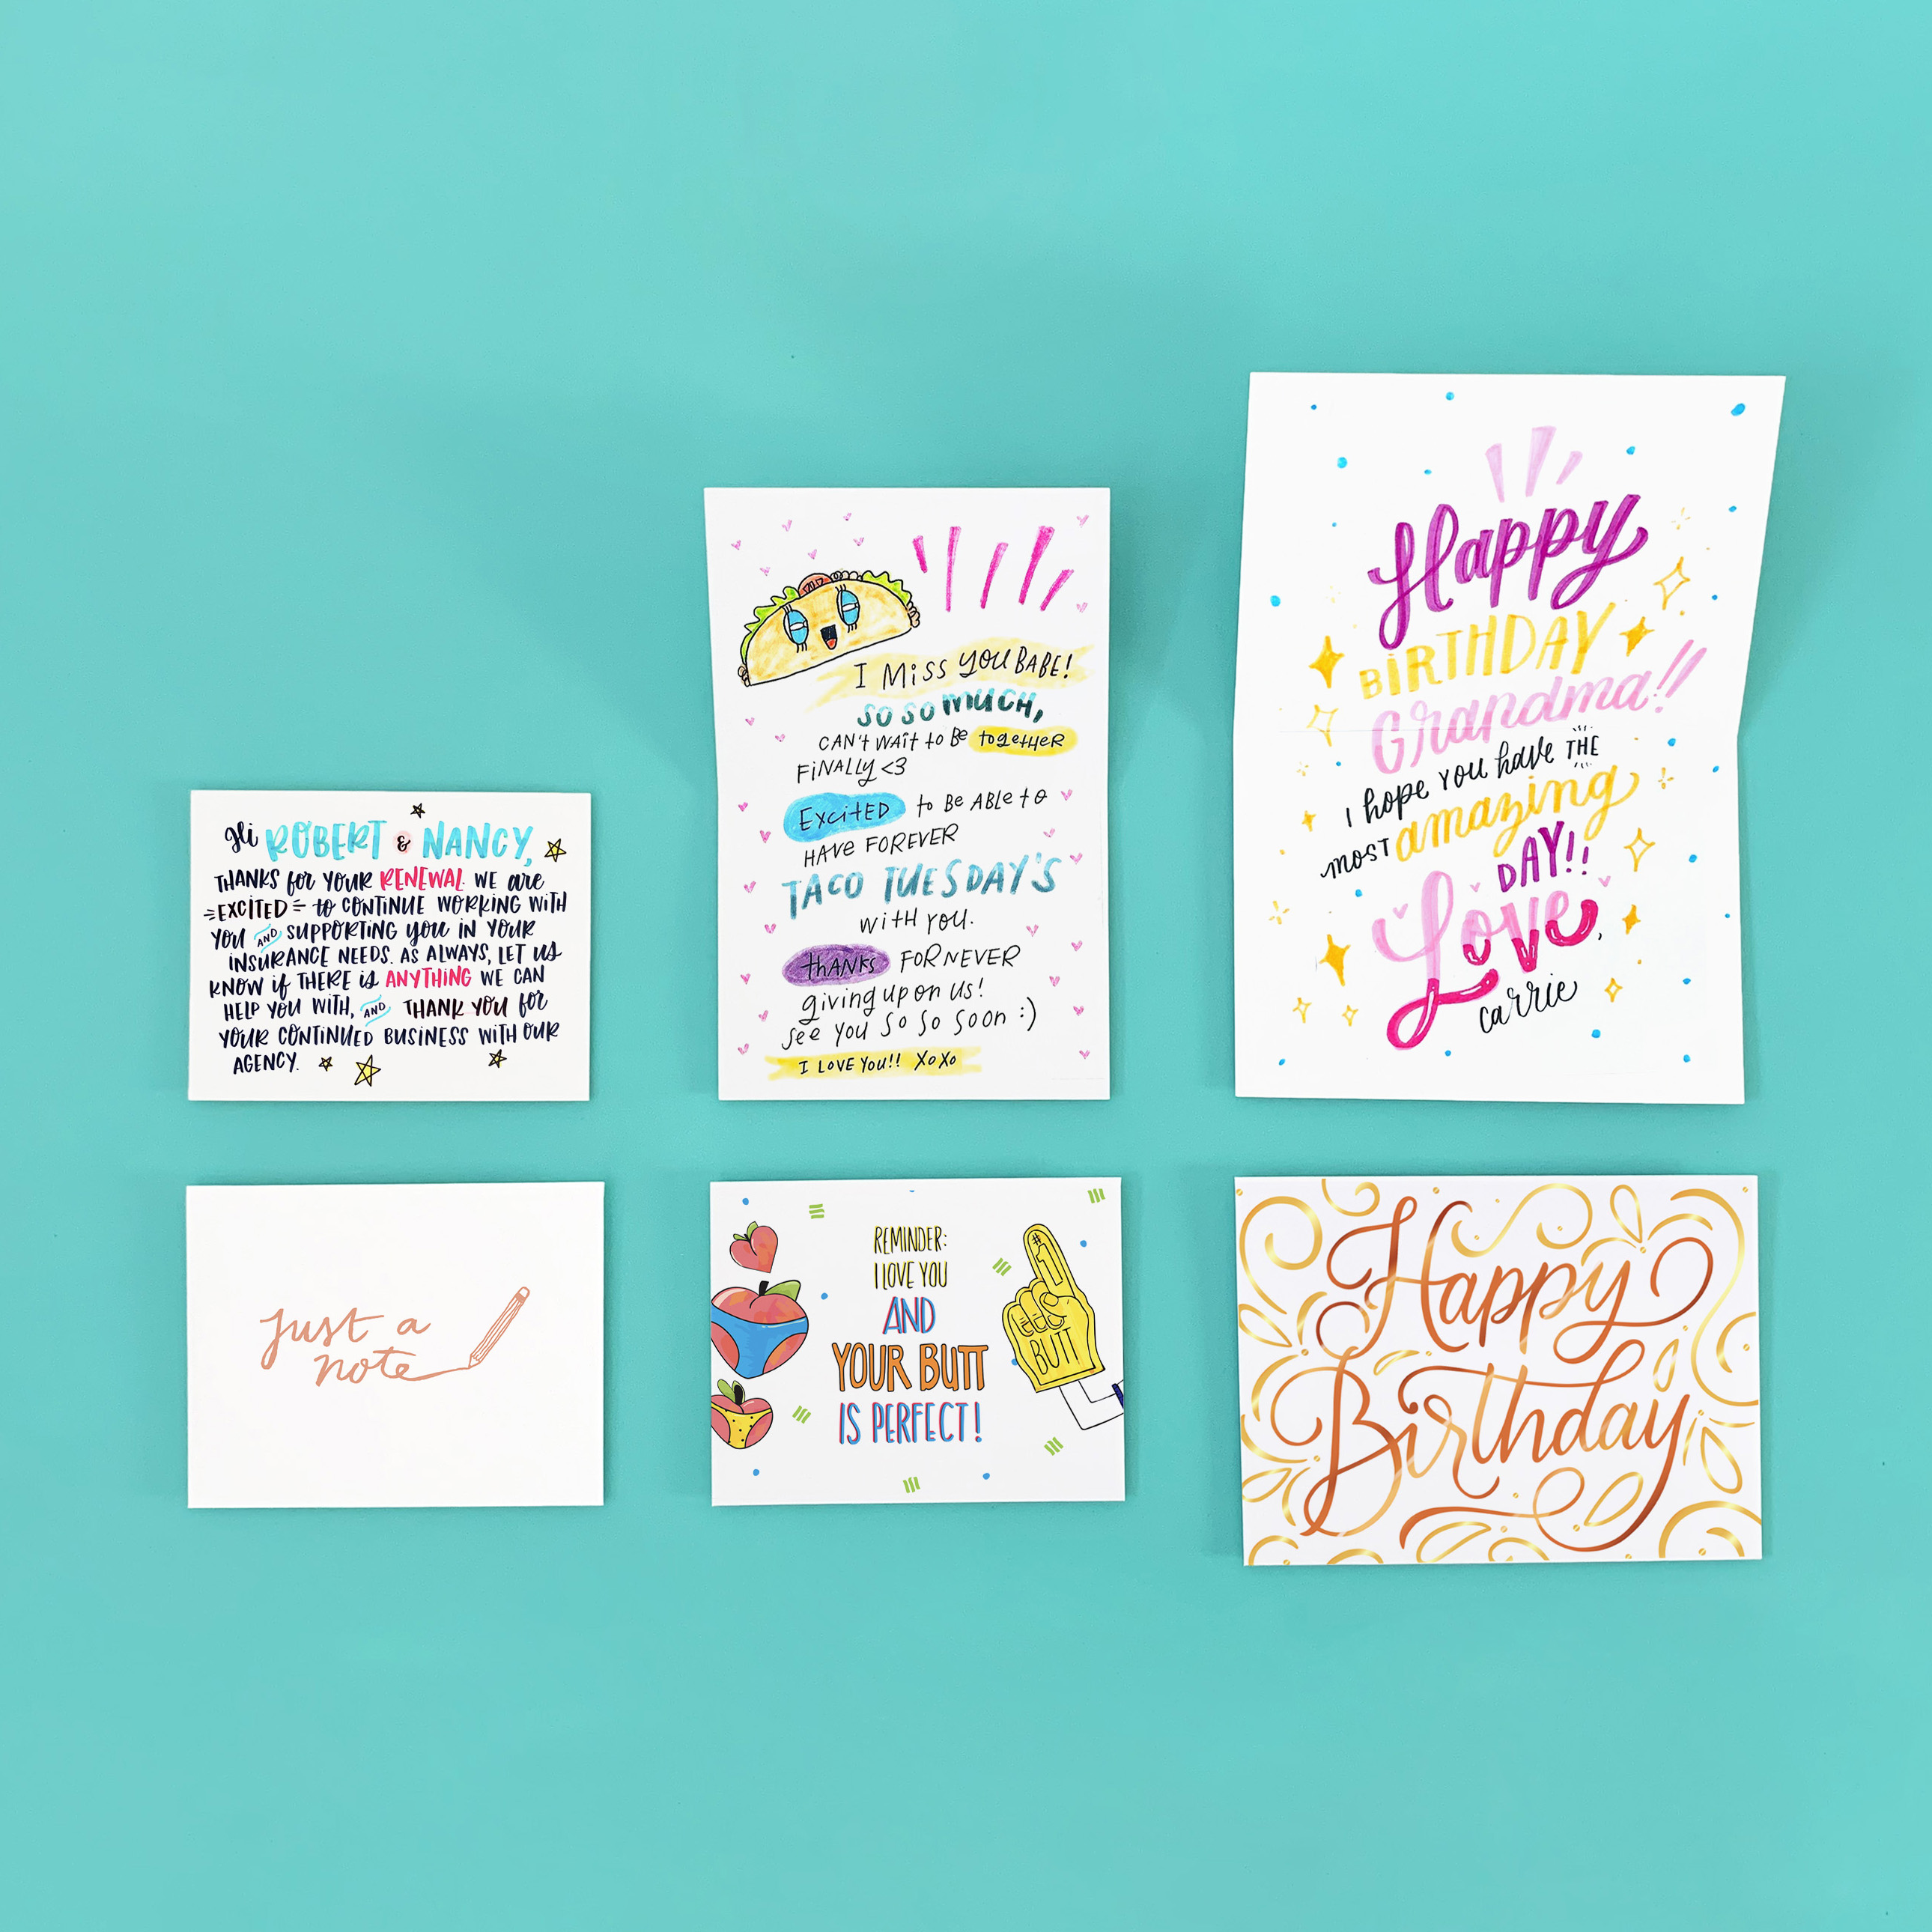 Colourful birthday cards and thank-you notes on turquoise background